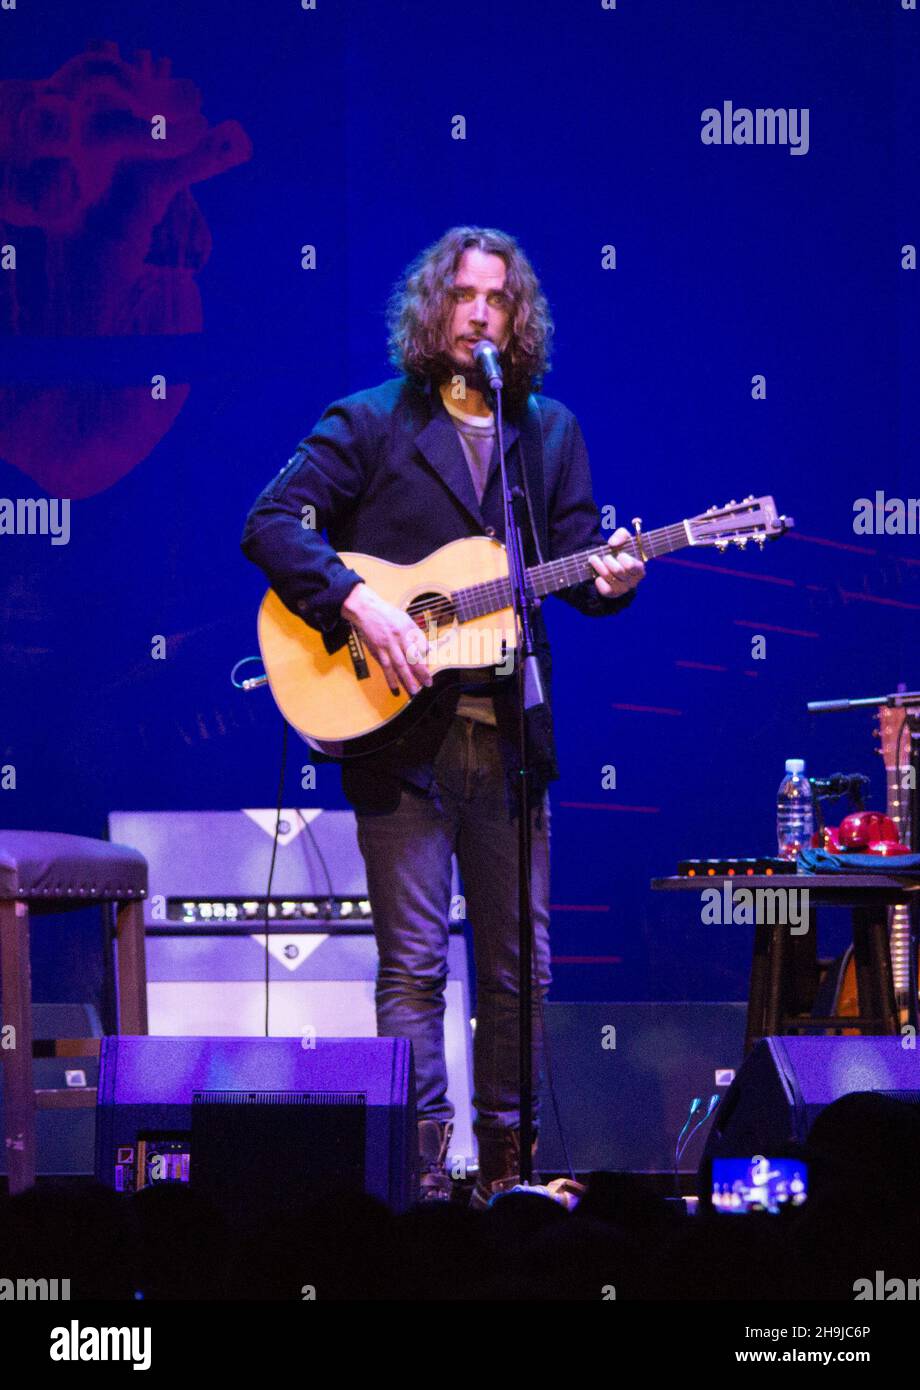 Chris Cornell performing live on stage at the Royal Albert Hall in London during his Higher Truth tour Stock Photo